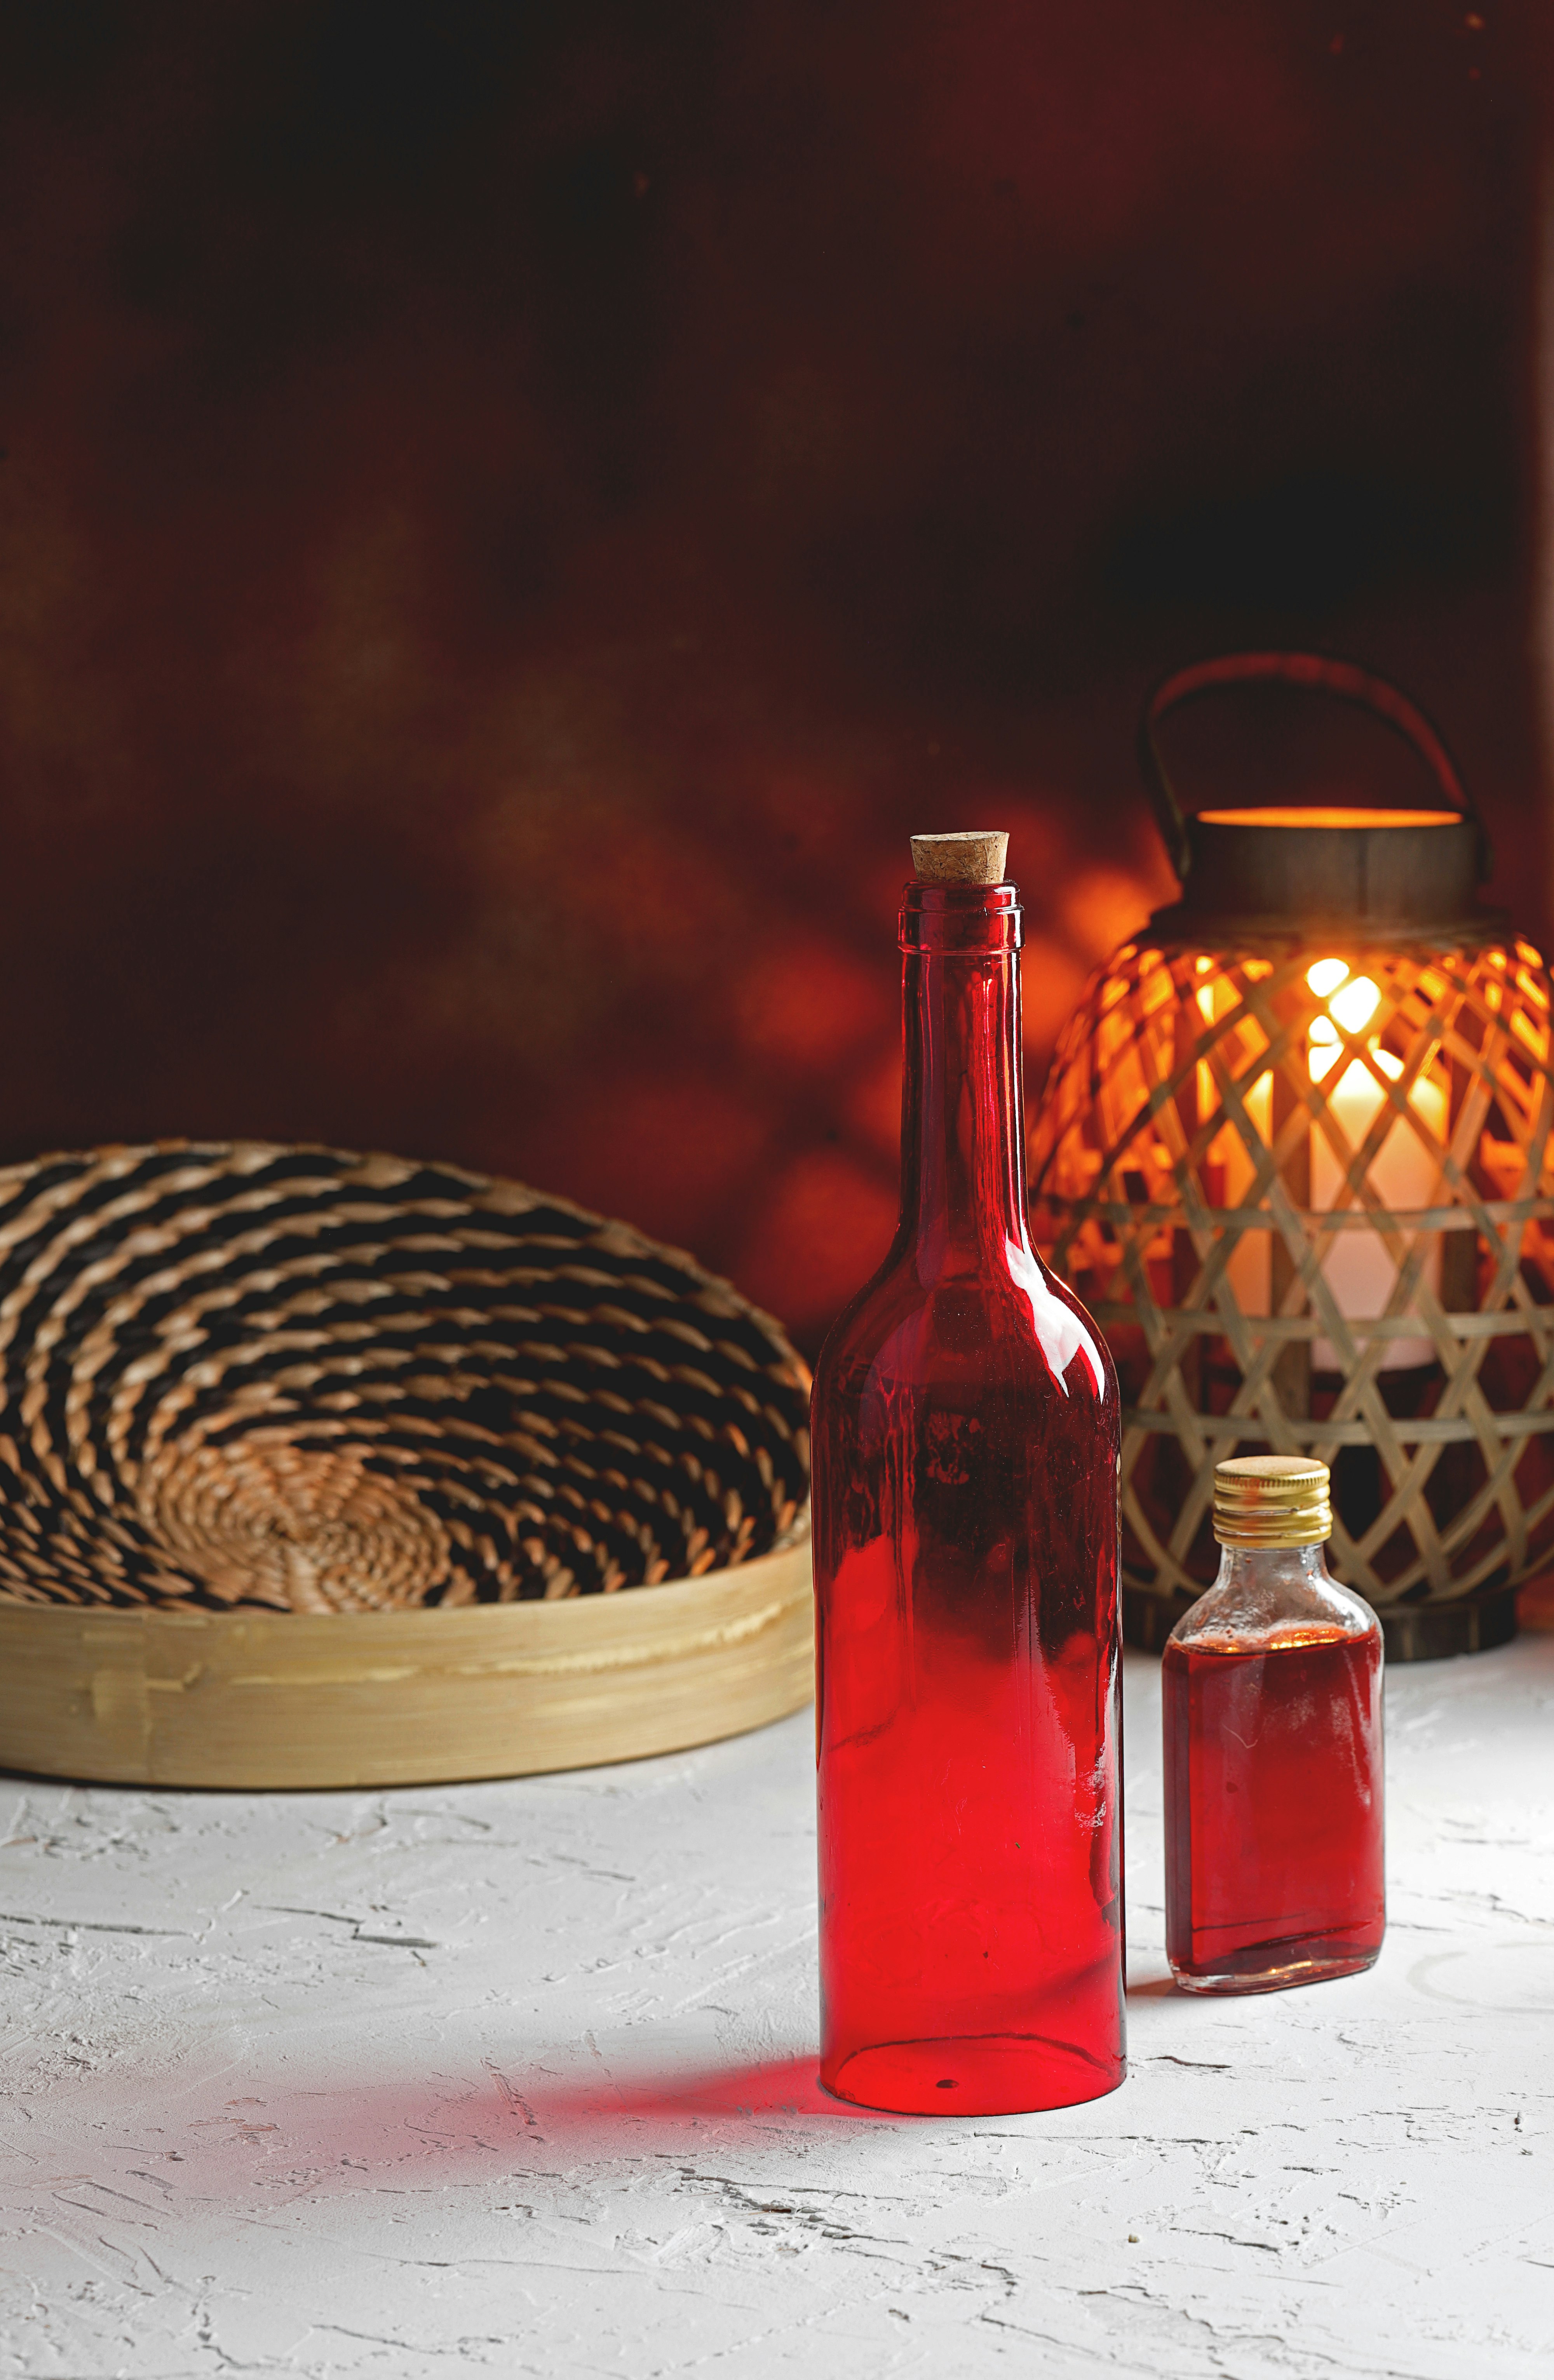 red glass bottle beside brown and black leopard print textile